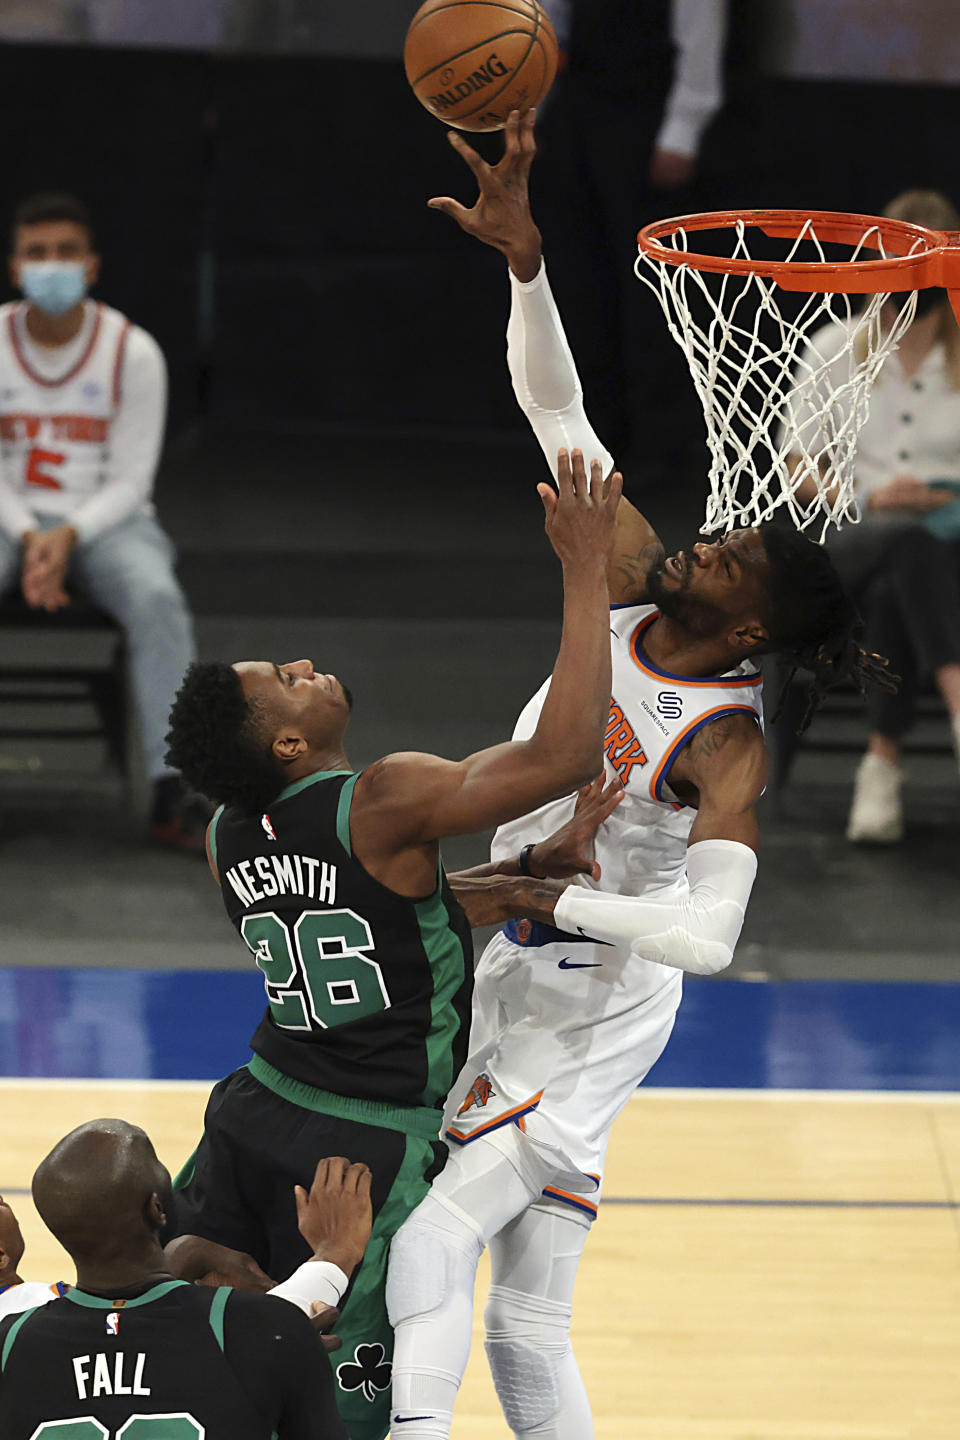 New York Knicks center Nerlens Noel (3) blocks a shot by Boston Celtics forward Aaron Nesmith (26) during the first half of an NBA basketball game in New York, Sunday, May 16, 2021. (Vincent Carchietta/Pool Photo via AP)